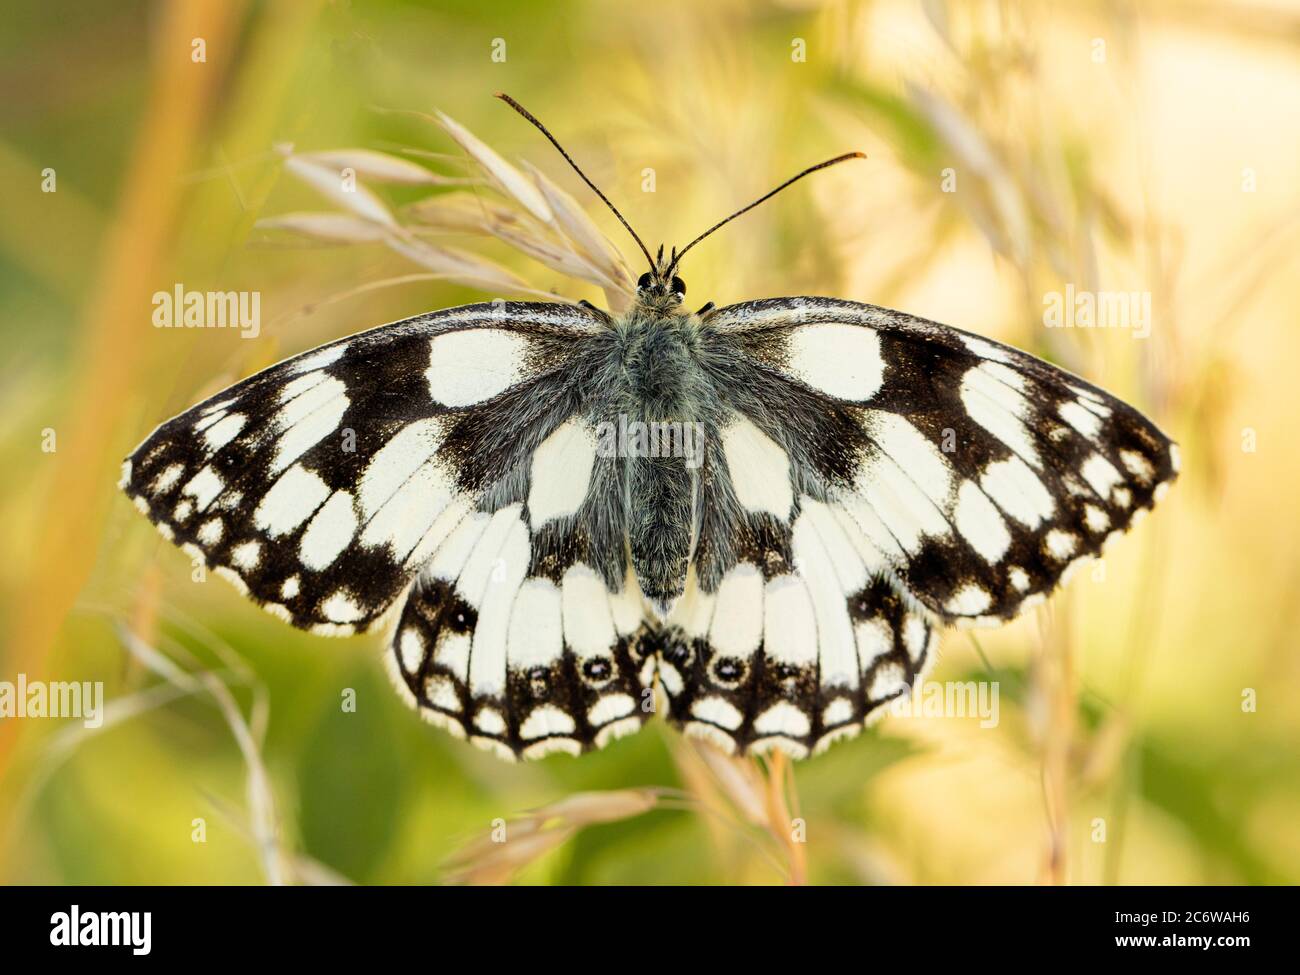 Marbled White butterfly, Melanargia galathea, attractive black and white butterfly, perched on a leaf, Bedfordshire, UK, summer 2020 Stock Photo